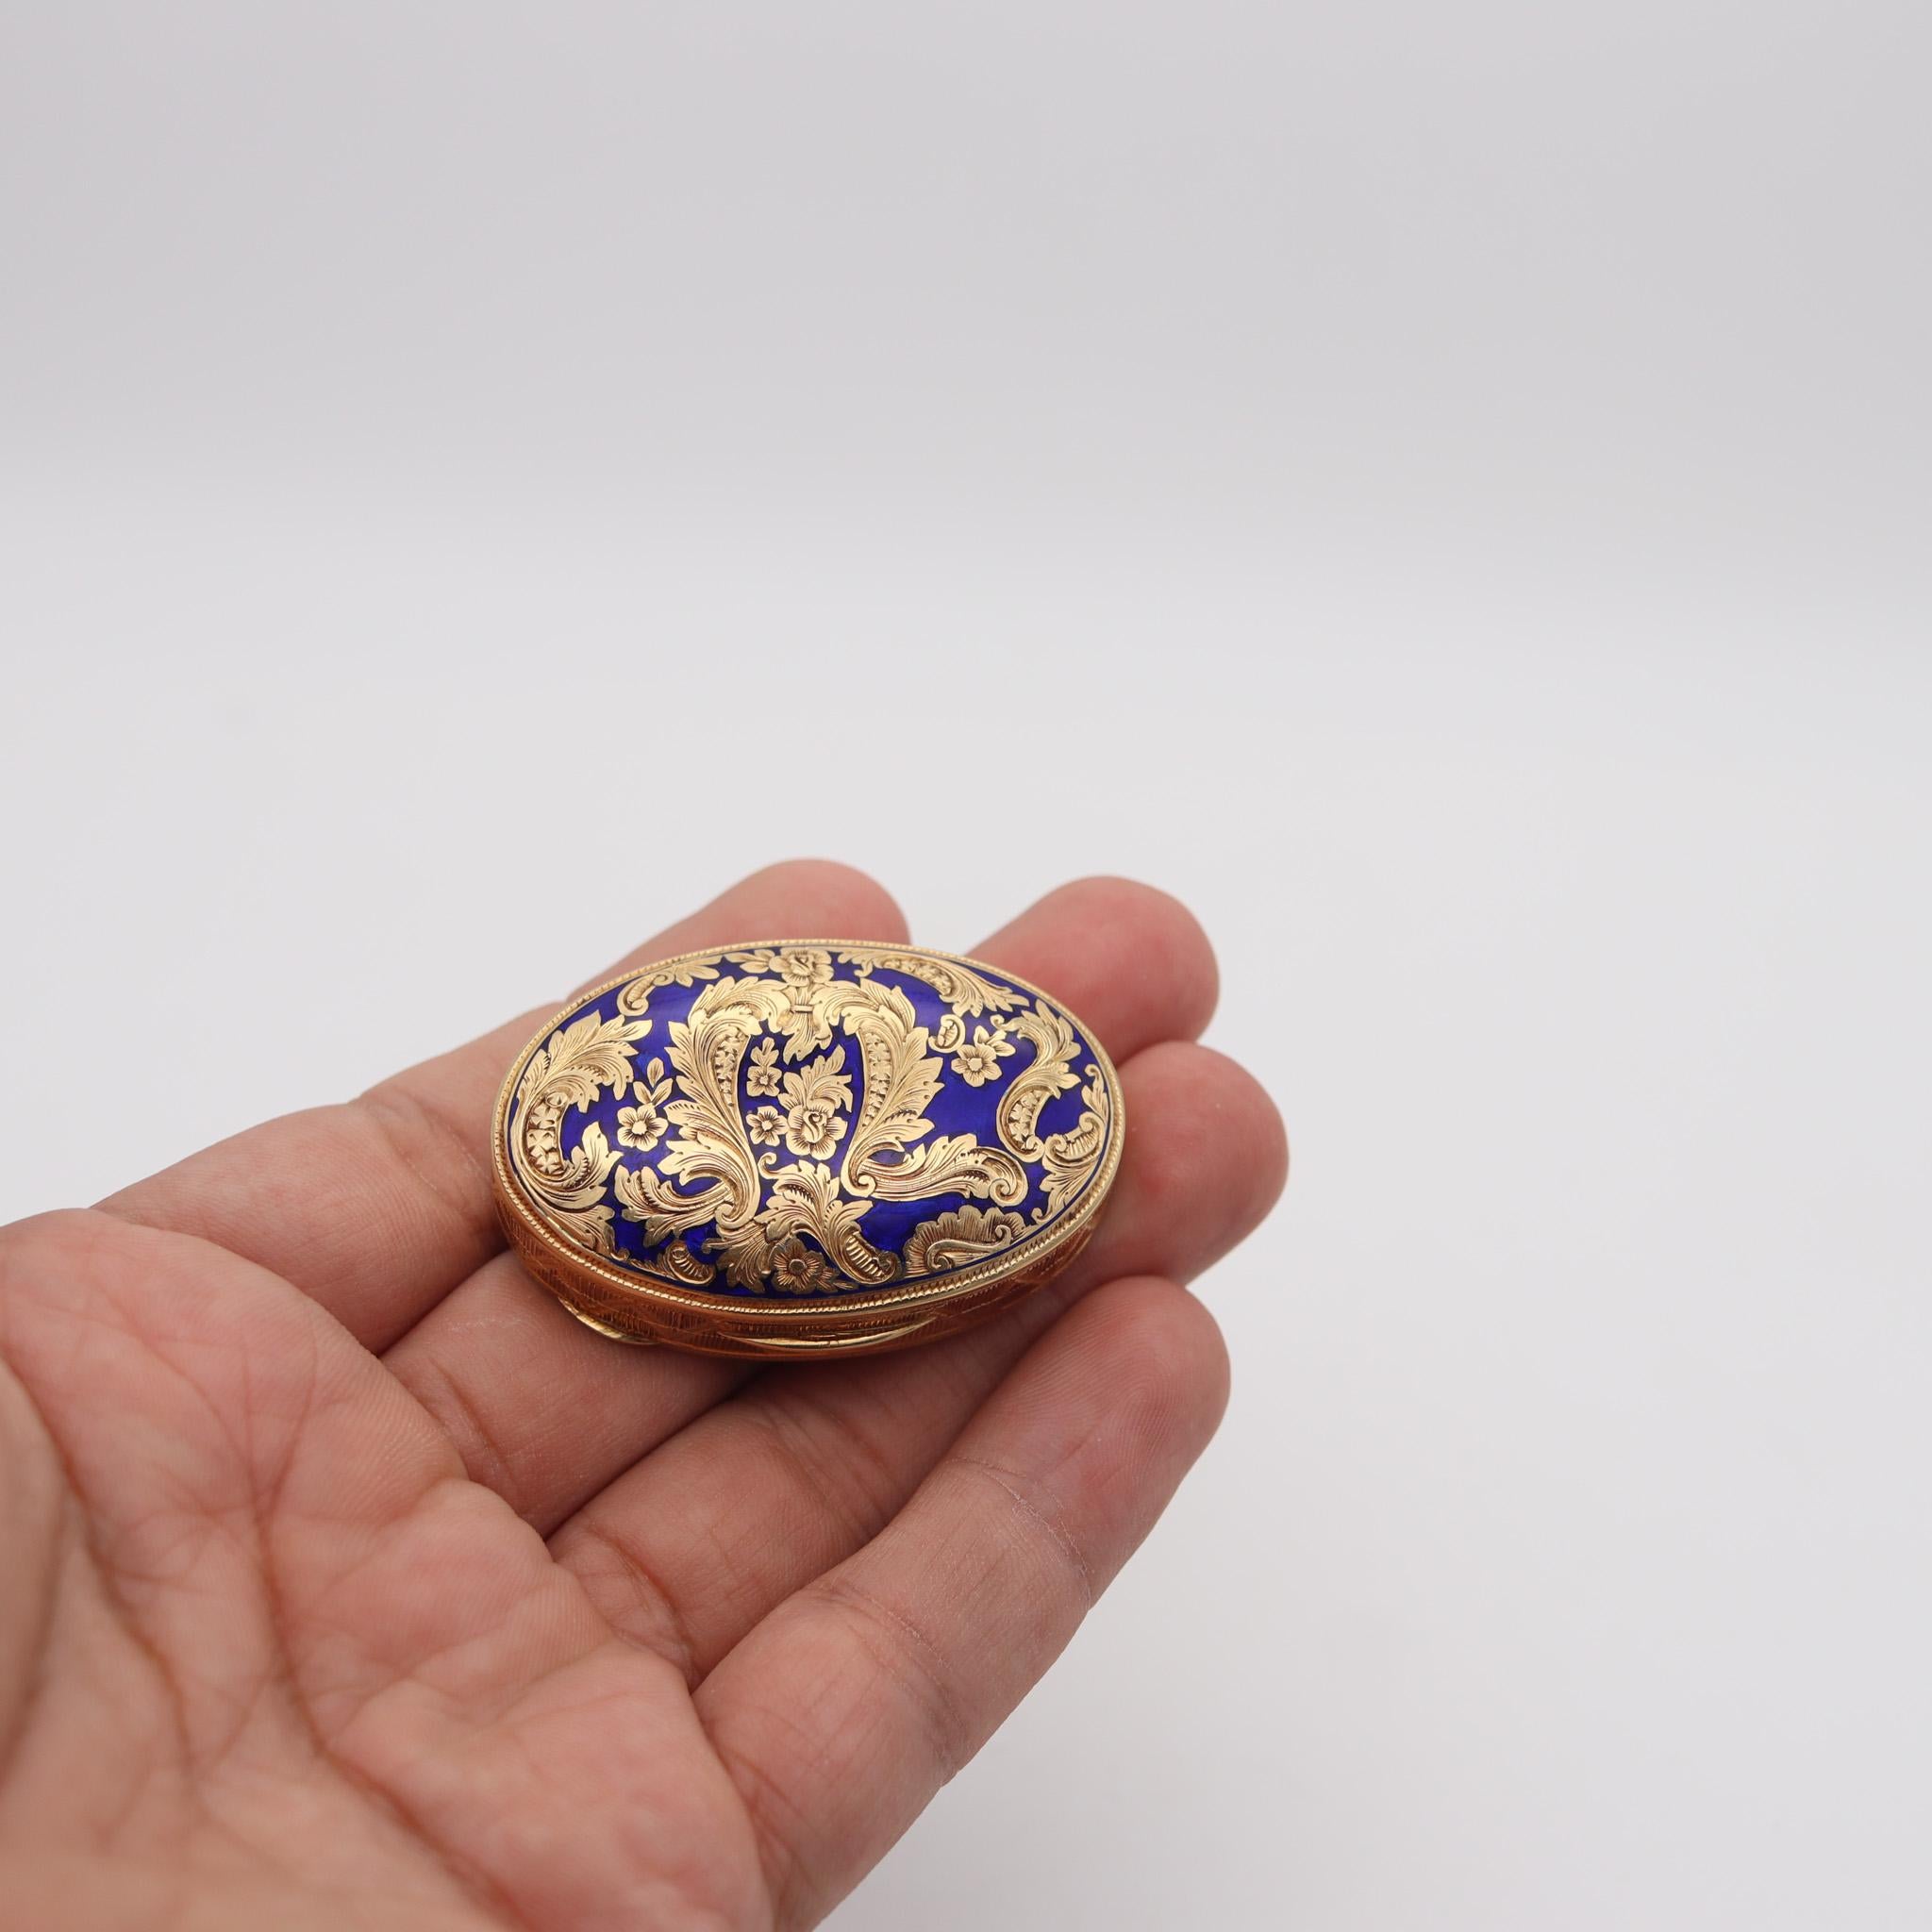 European 1930 Baroque Revival Blue Enameled Pill Box In Solid 18Kt yellow Gold For Sale 4